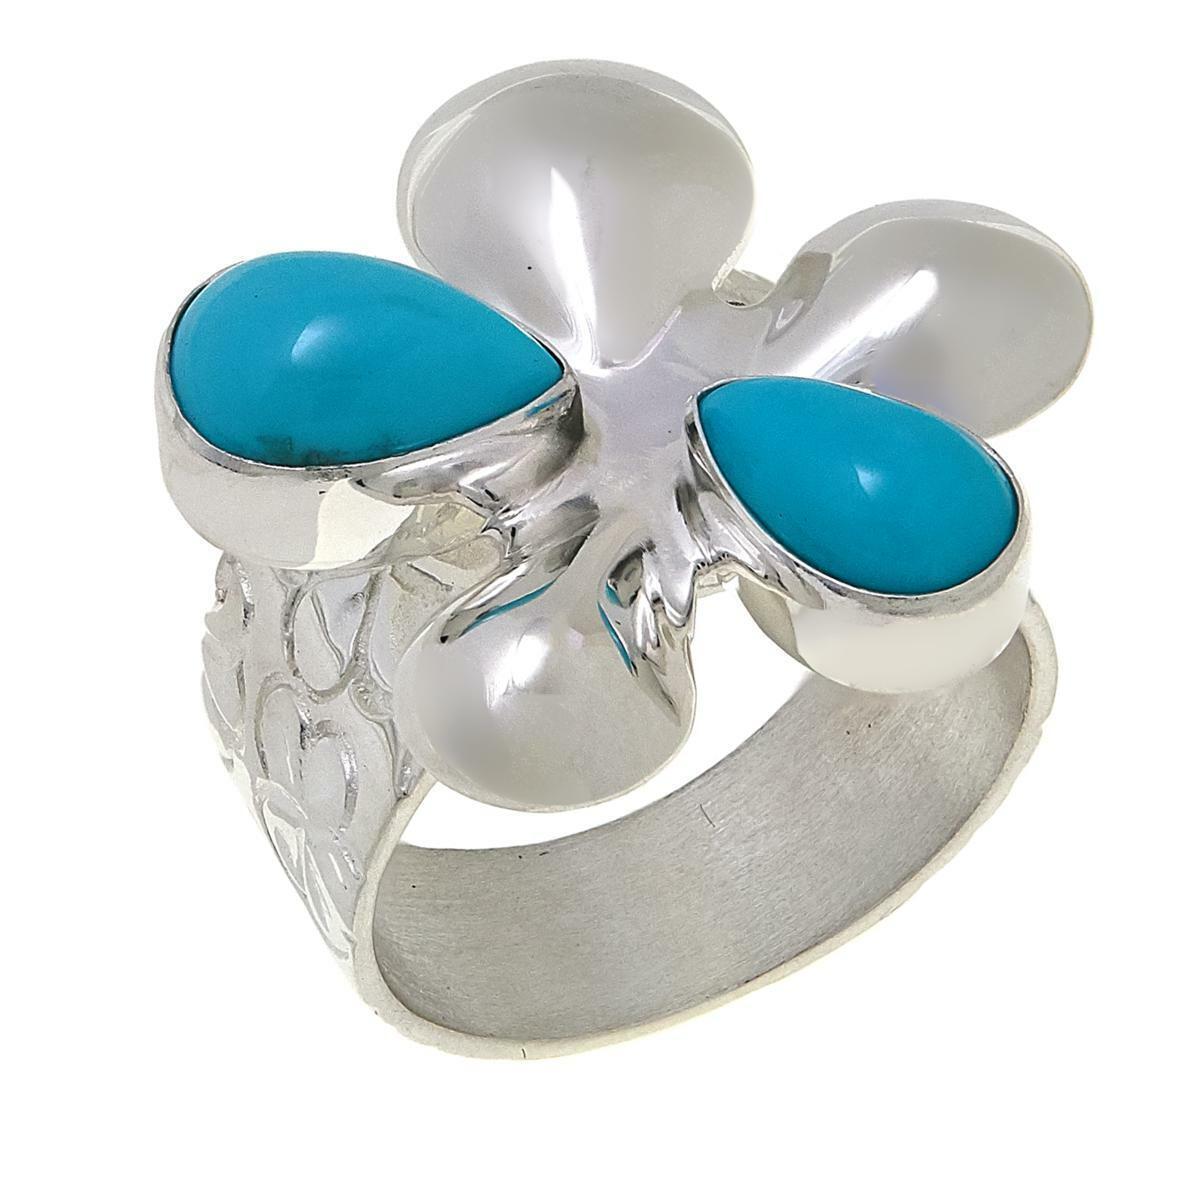 Jay King Campitos Turquoise Sterling Silver Flower-Desing Ring Size 7 HSN $65.00